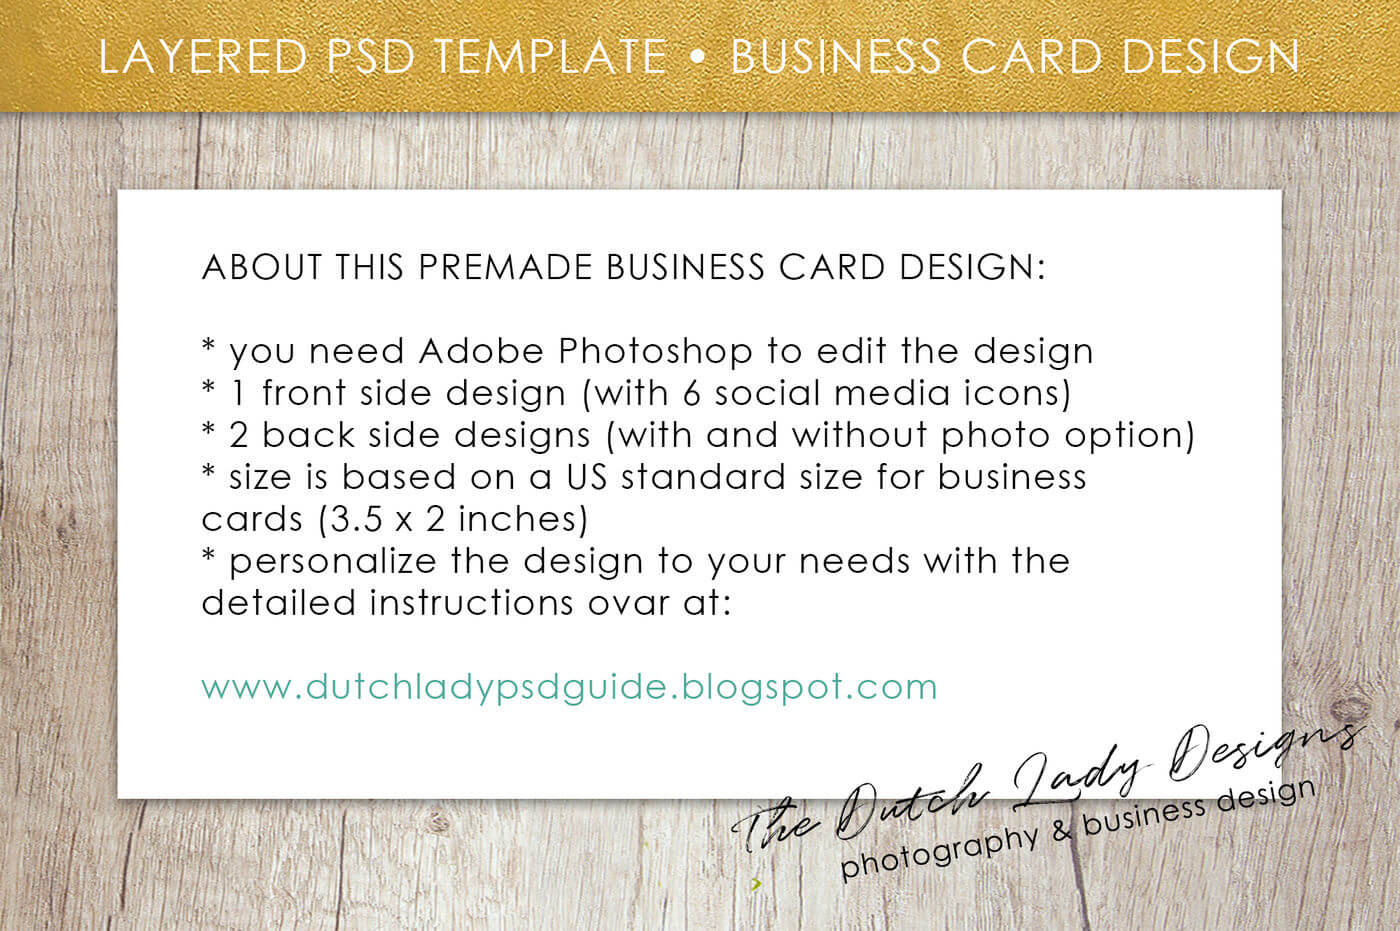 Psd Business Card Template #4The Dutch Lady Designs In Business Card Size Template Psd